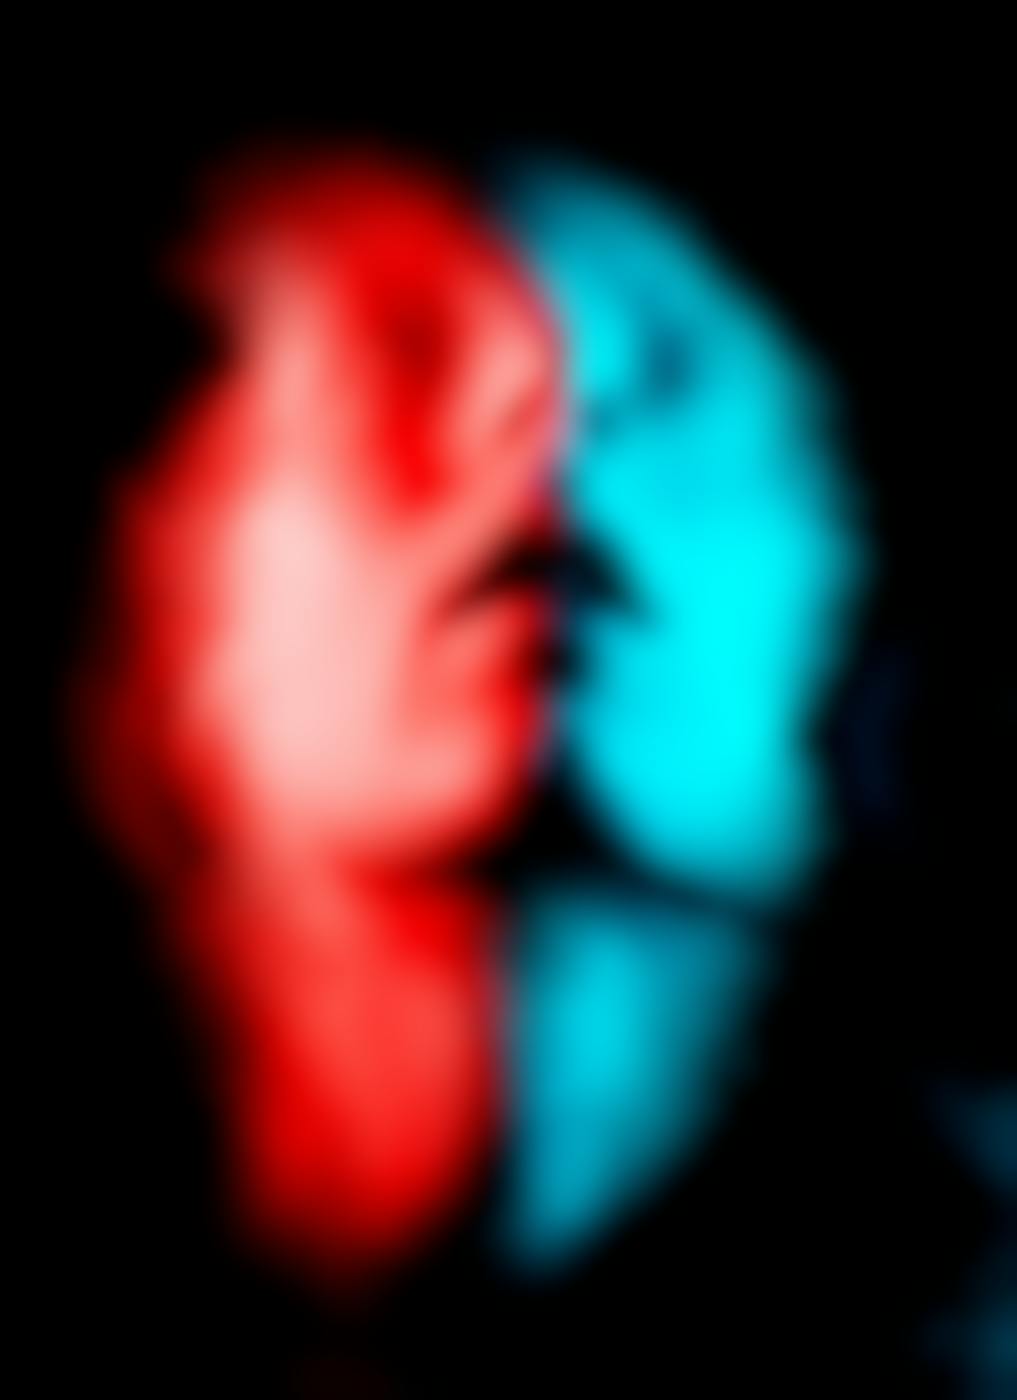 Abstract red and blue human faces